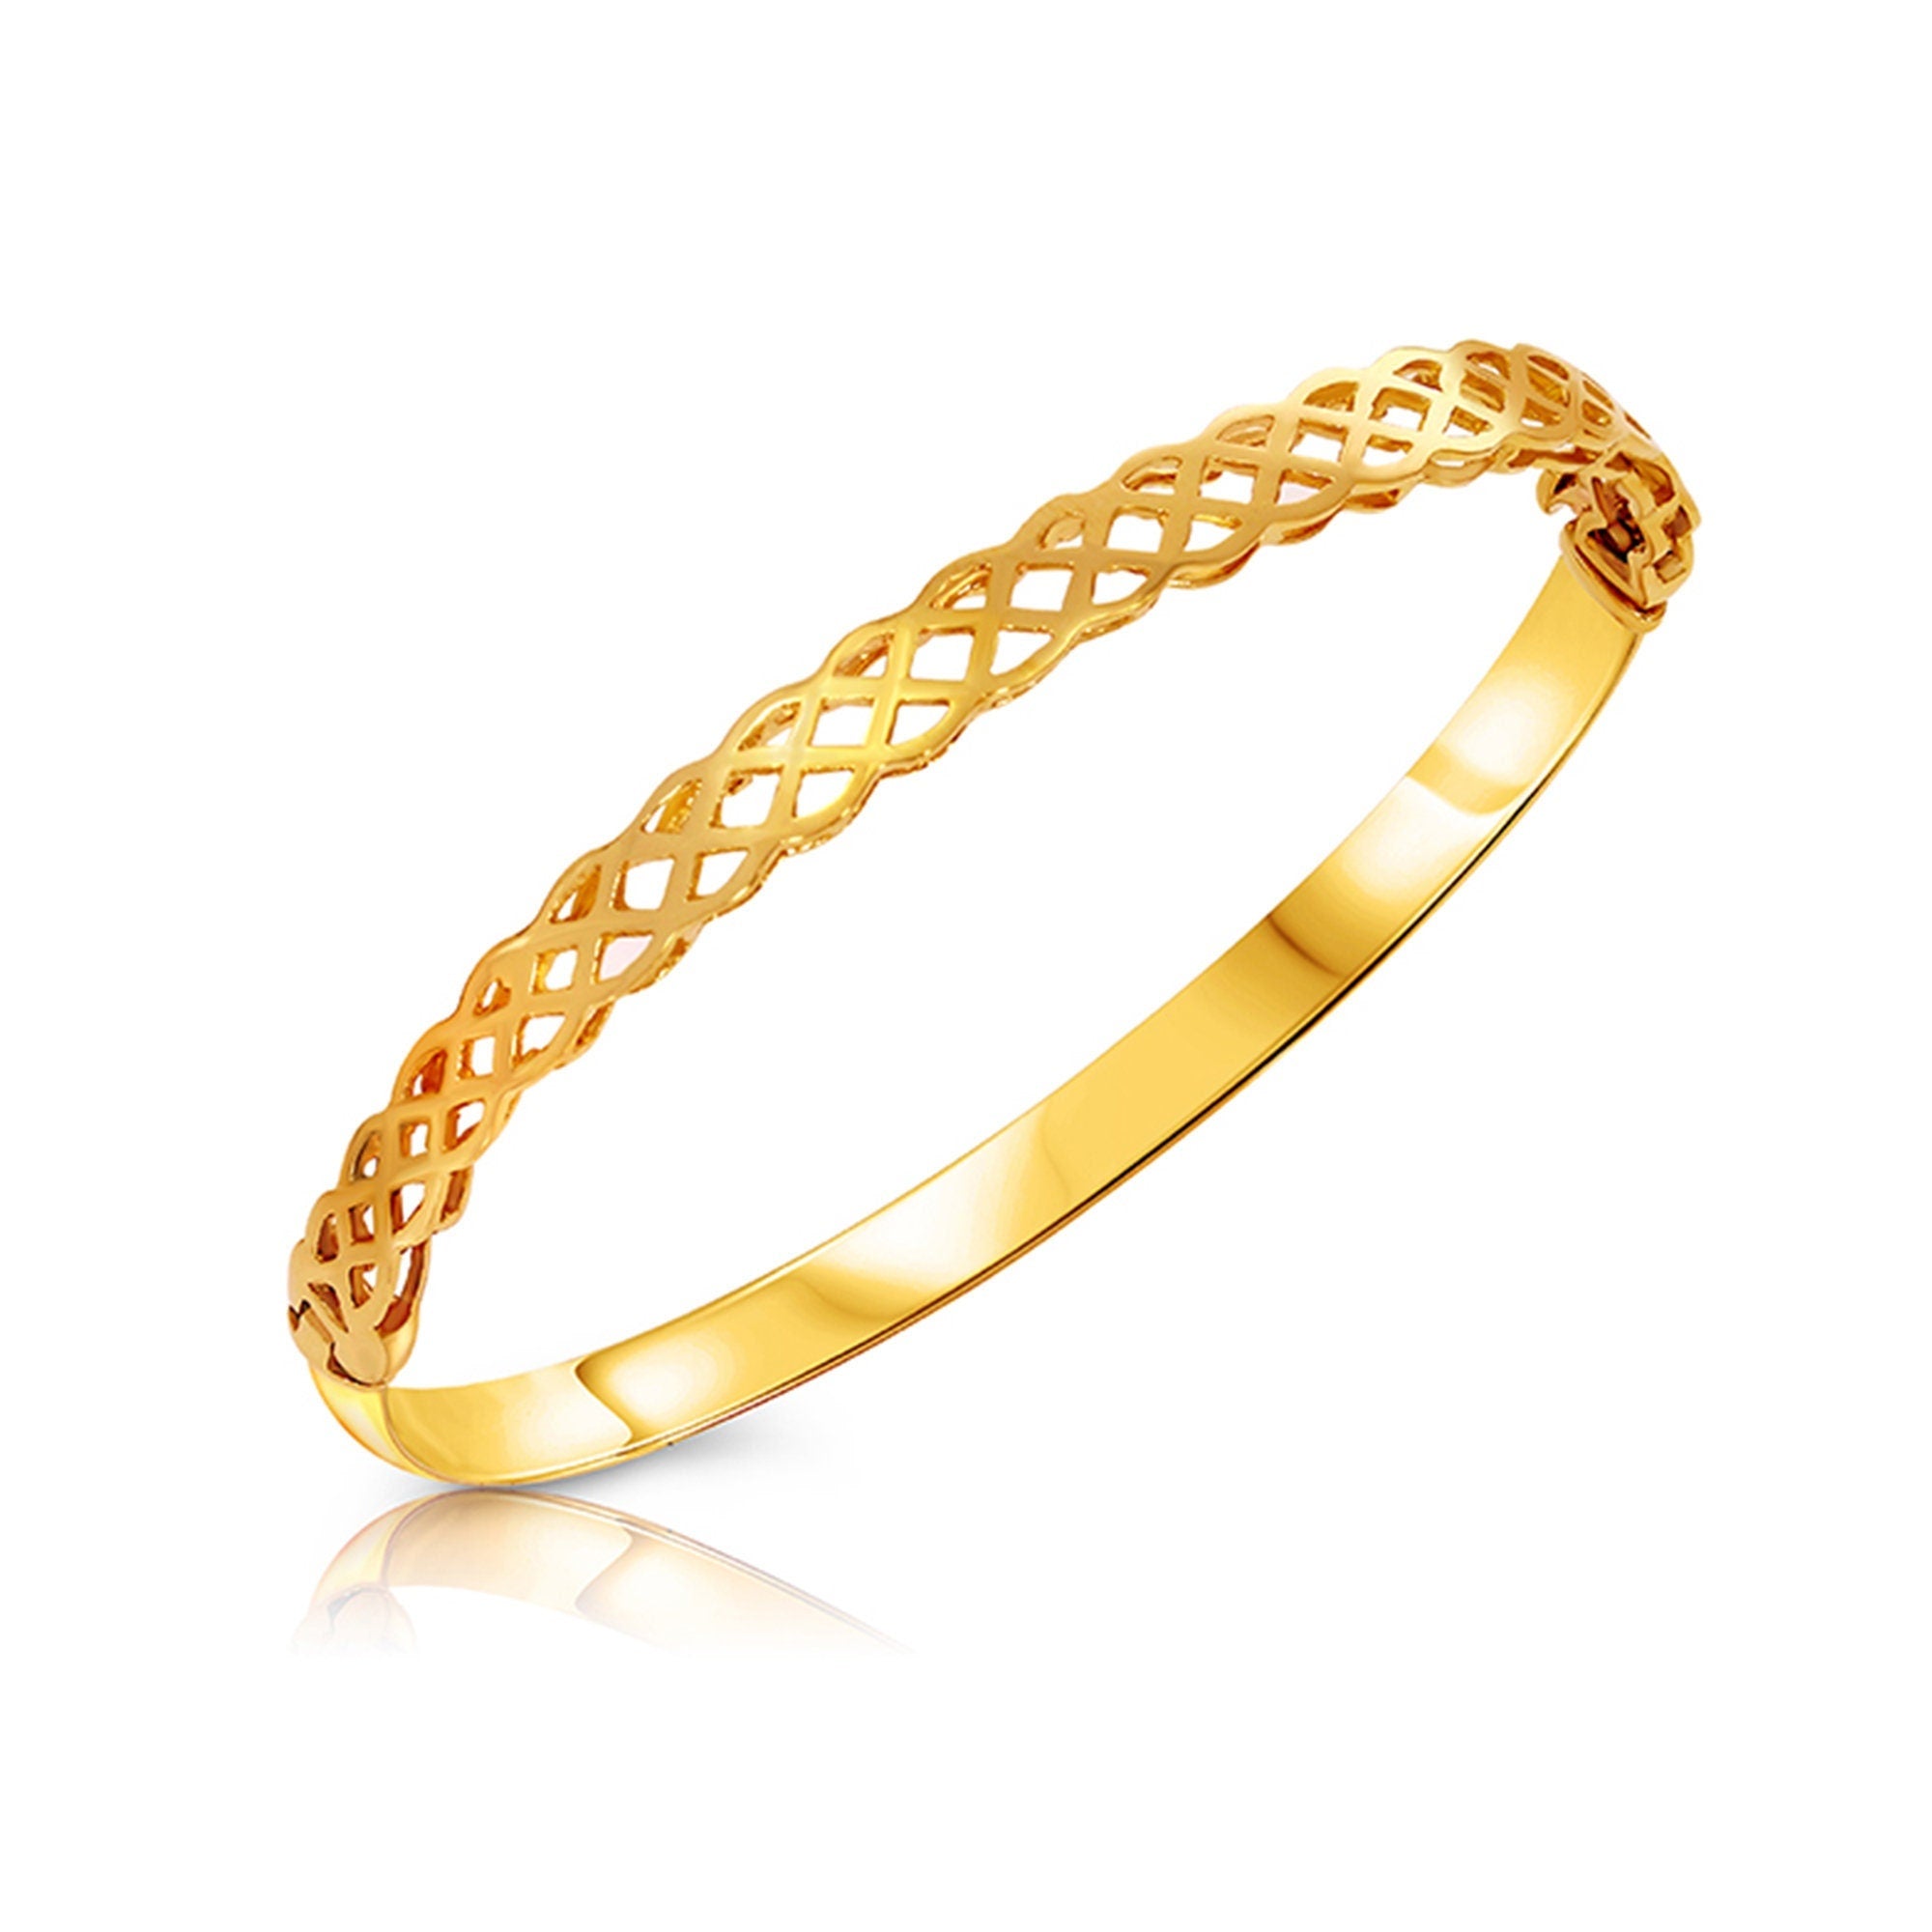 14k solid gold braided bangle bracelet. fits up to 7.5" wrist